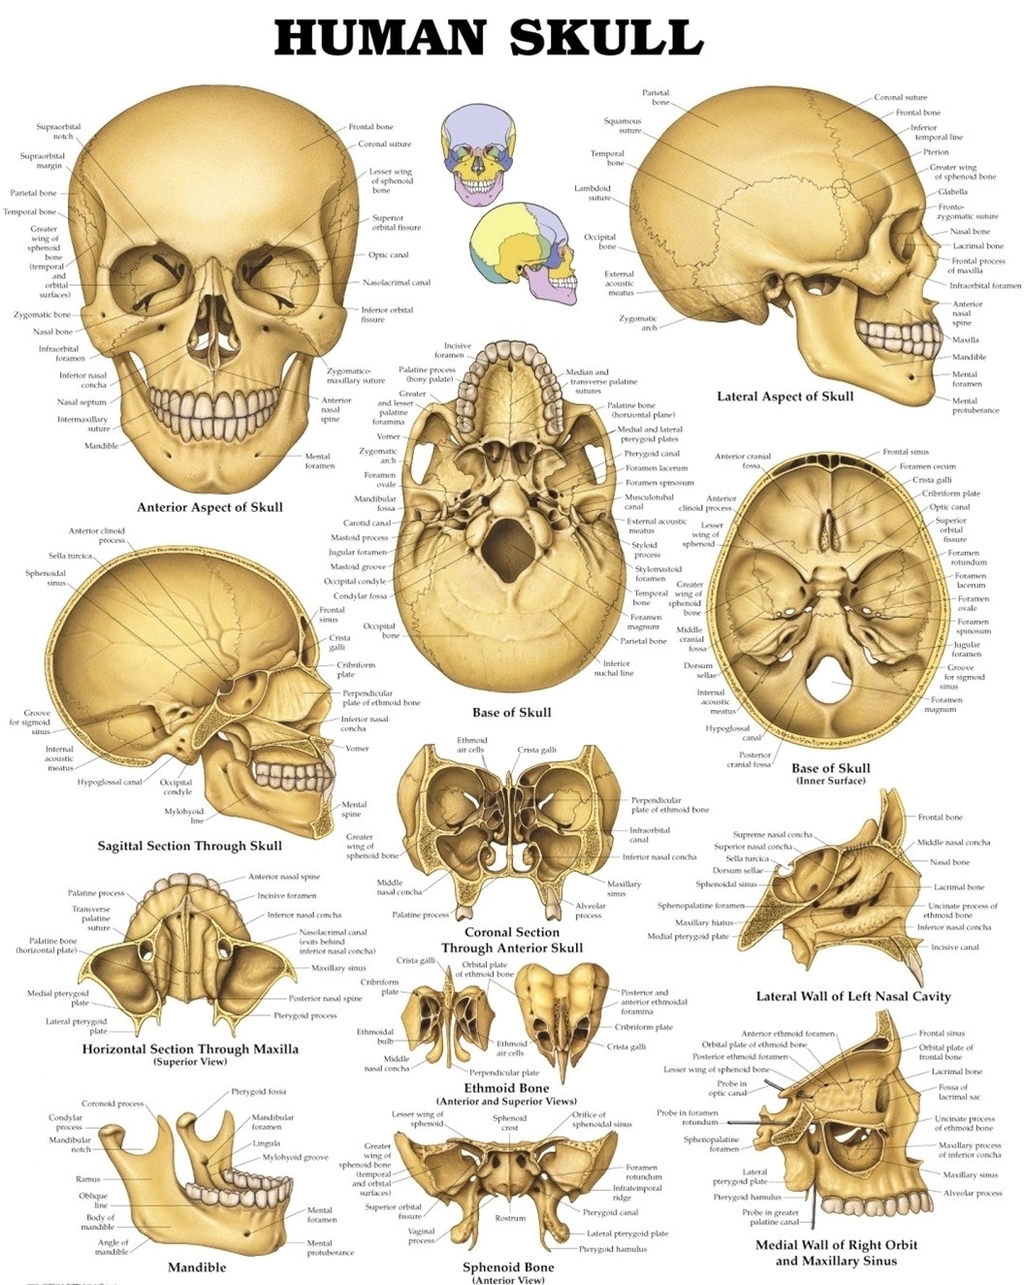 Human skull from different sides